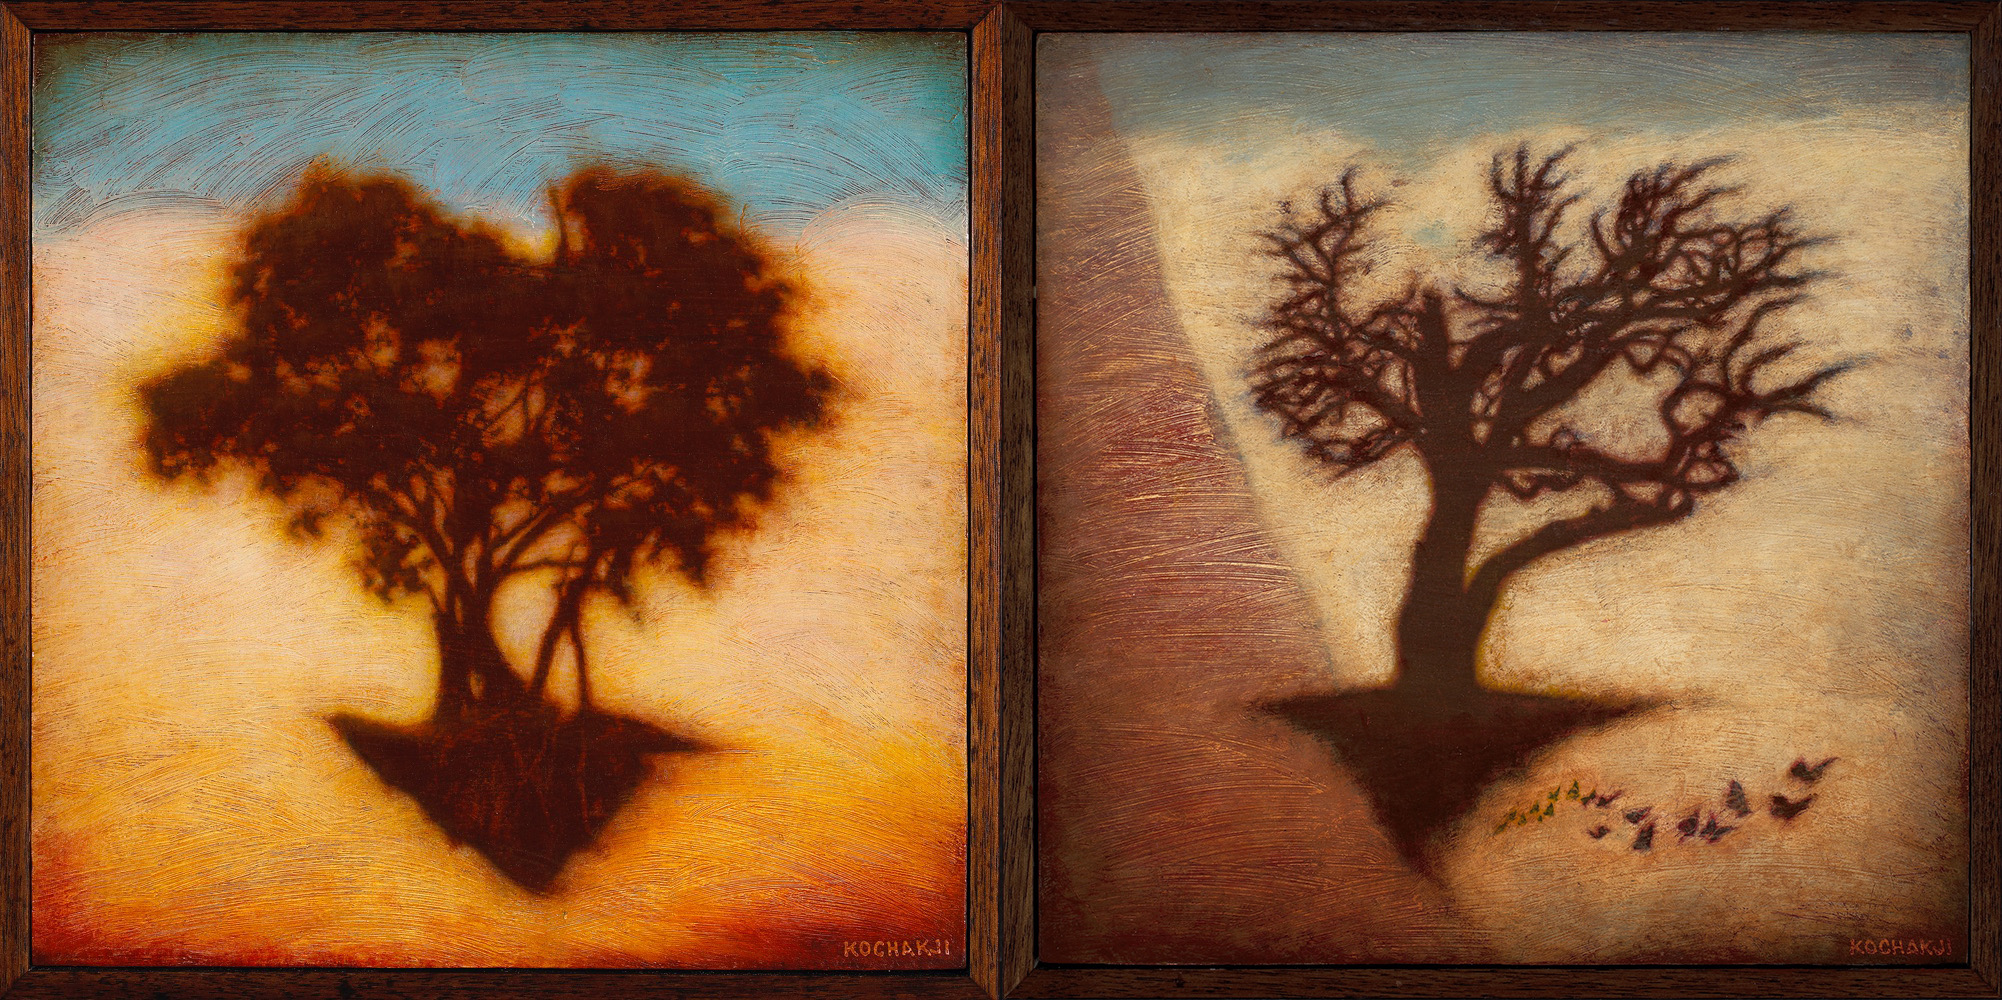 Portrait of a Flying Tree, Portrait of a Flying Tree 2 - oil on panel - 9.25x9.25” (each) - TAG Gallery